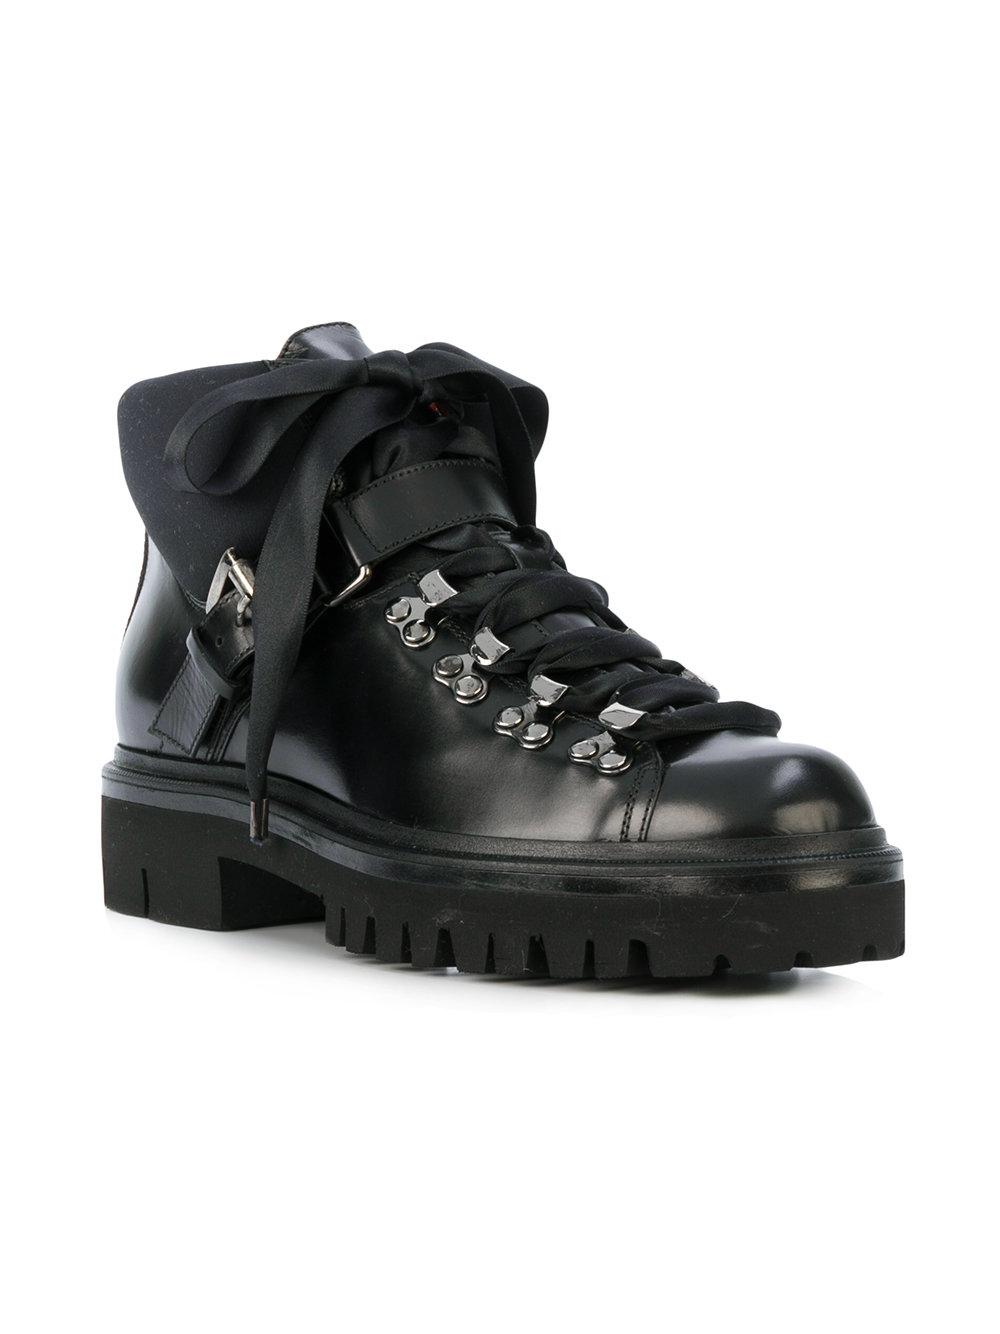 Lyst - Santoni Lace-up Fastening Boots in Black